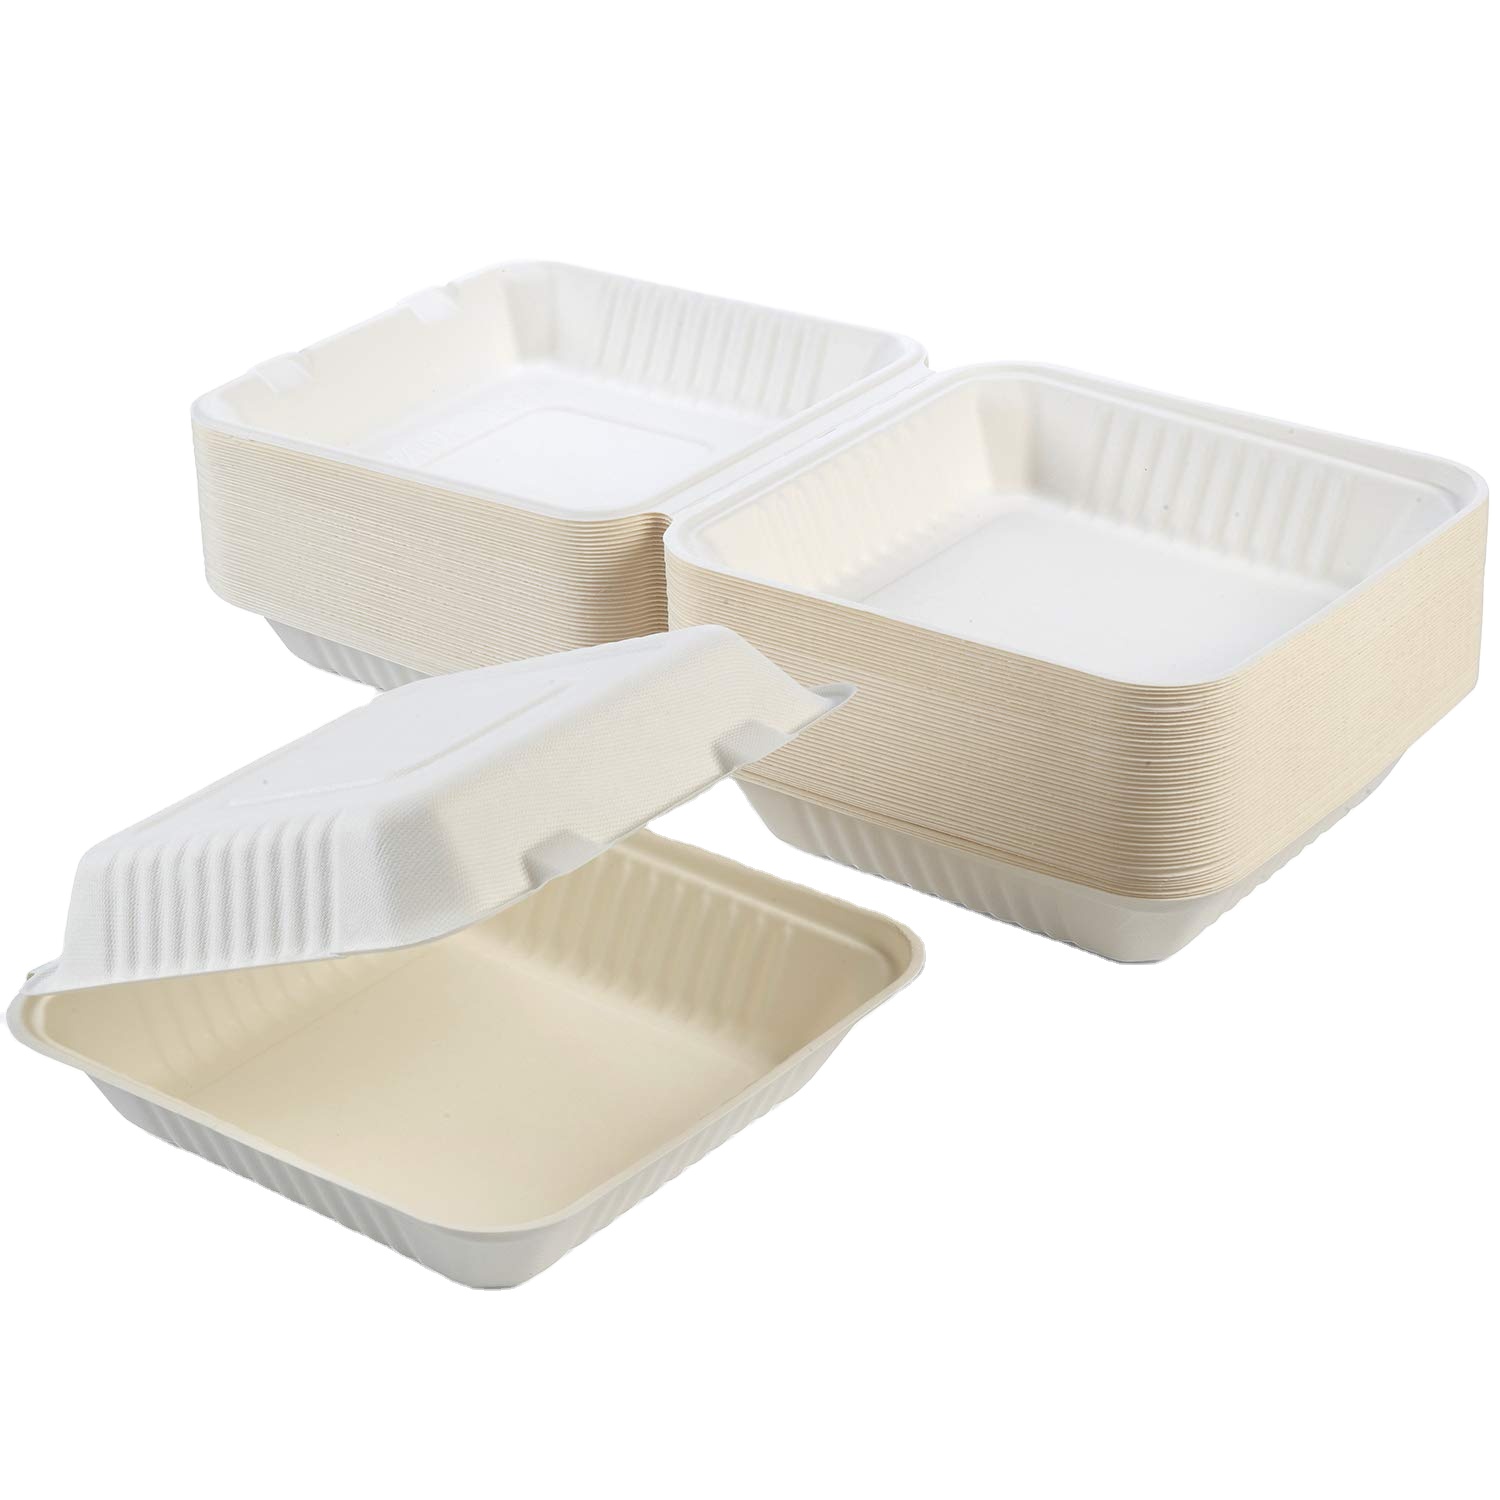 GeoTegrity - PFAS Free 8 Box Eco-friendly Packaging Food Clamshell inch Bagasse Bagasse Lunch Sugarcane Biodegradable Box Disposable